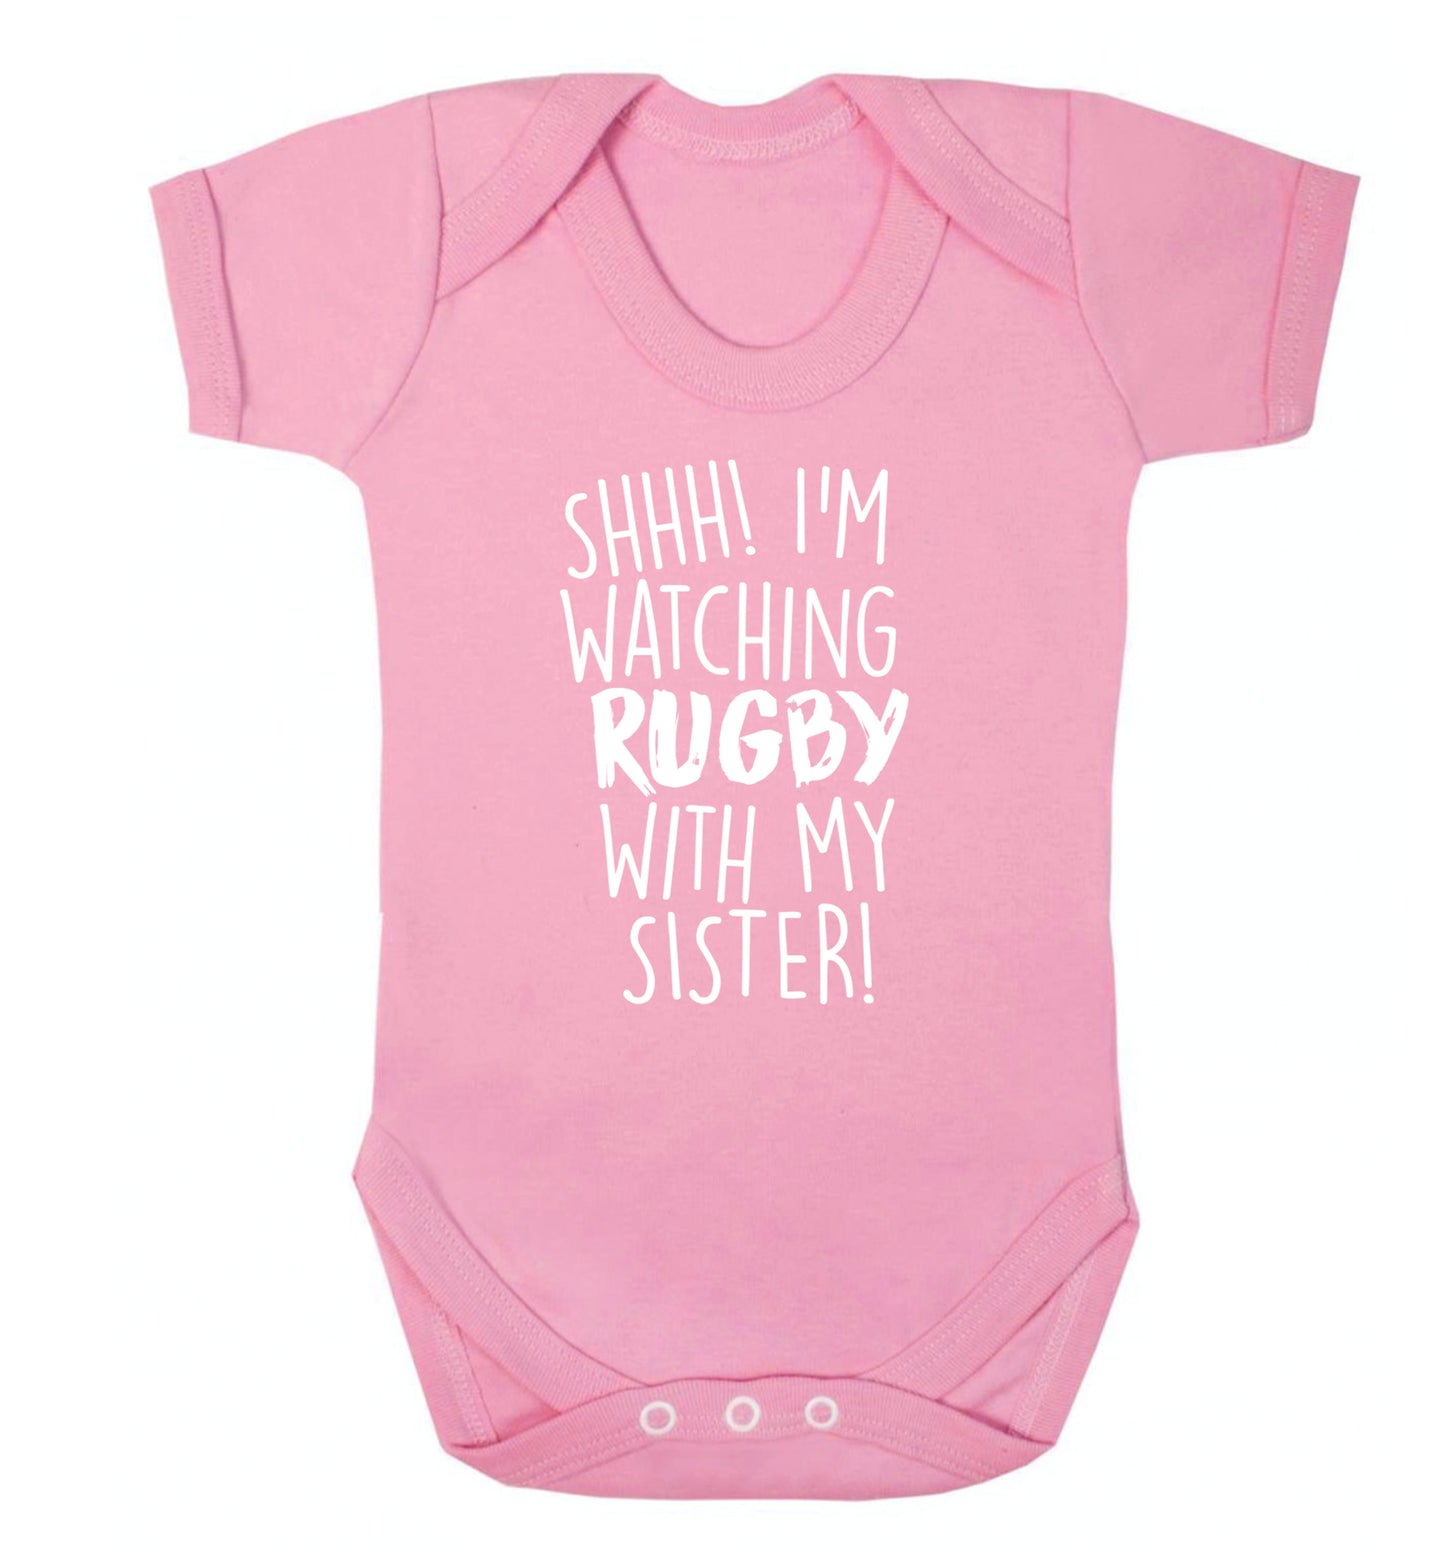 Shh... I'm watching rugby with my sister Baby Vest pale pink 18-24 months